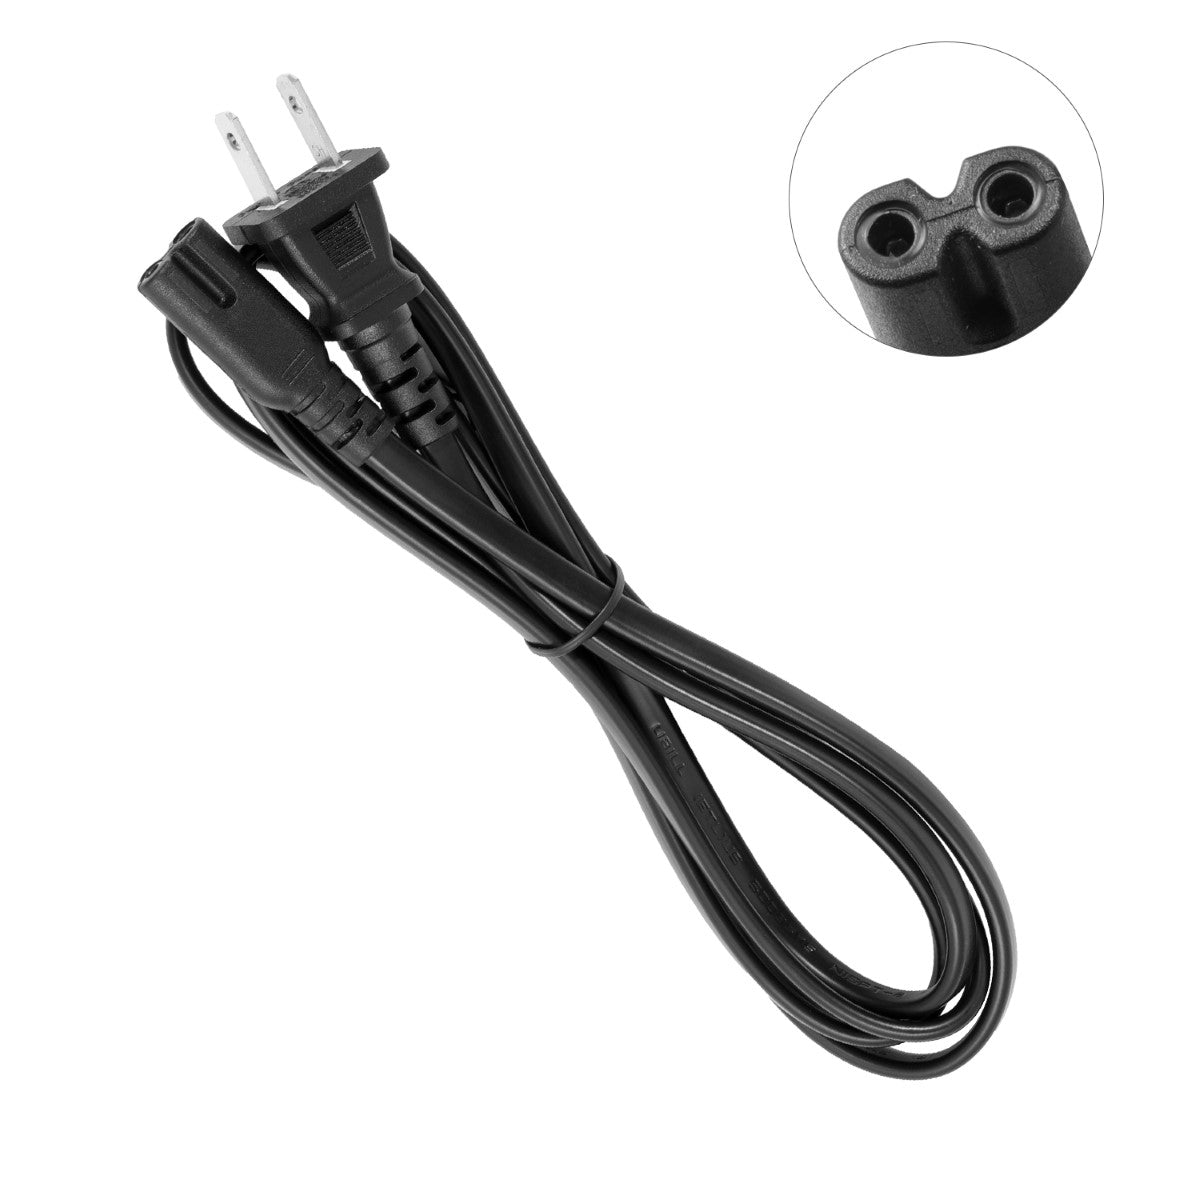 Power Cable for HP DeskJet 3752 All-in-One Printer.